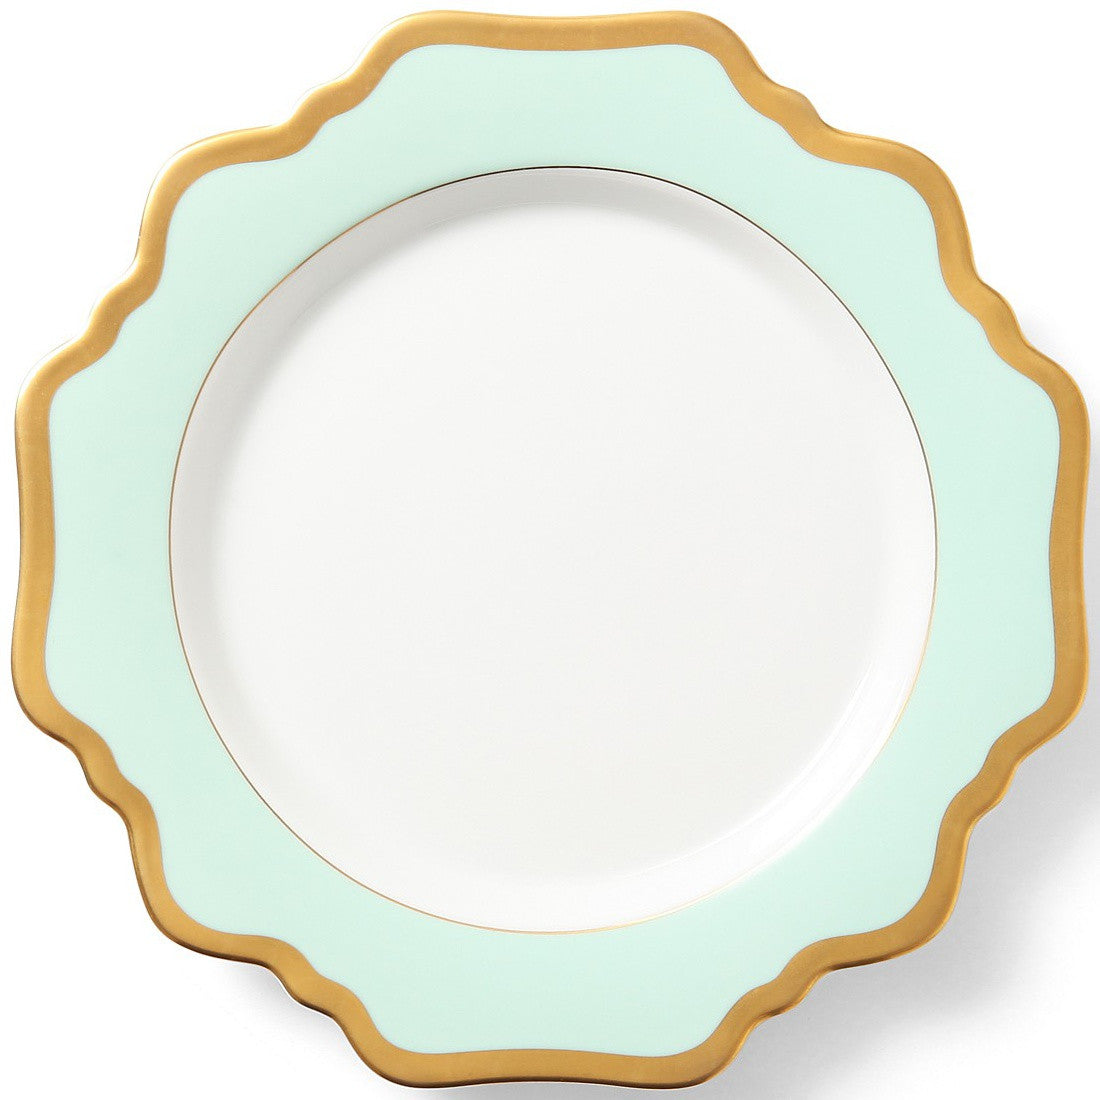 Natural shades of green, blue, violet, and yellow are brought to life with 24-karat gold accents. Each piece of Anna Weatherley china is a true work of art, with details hand-painted by Hungarian artisans who were individually trained by Anna herself.